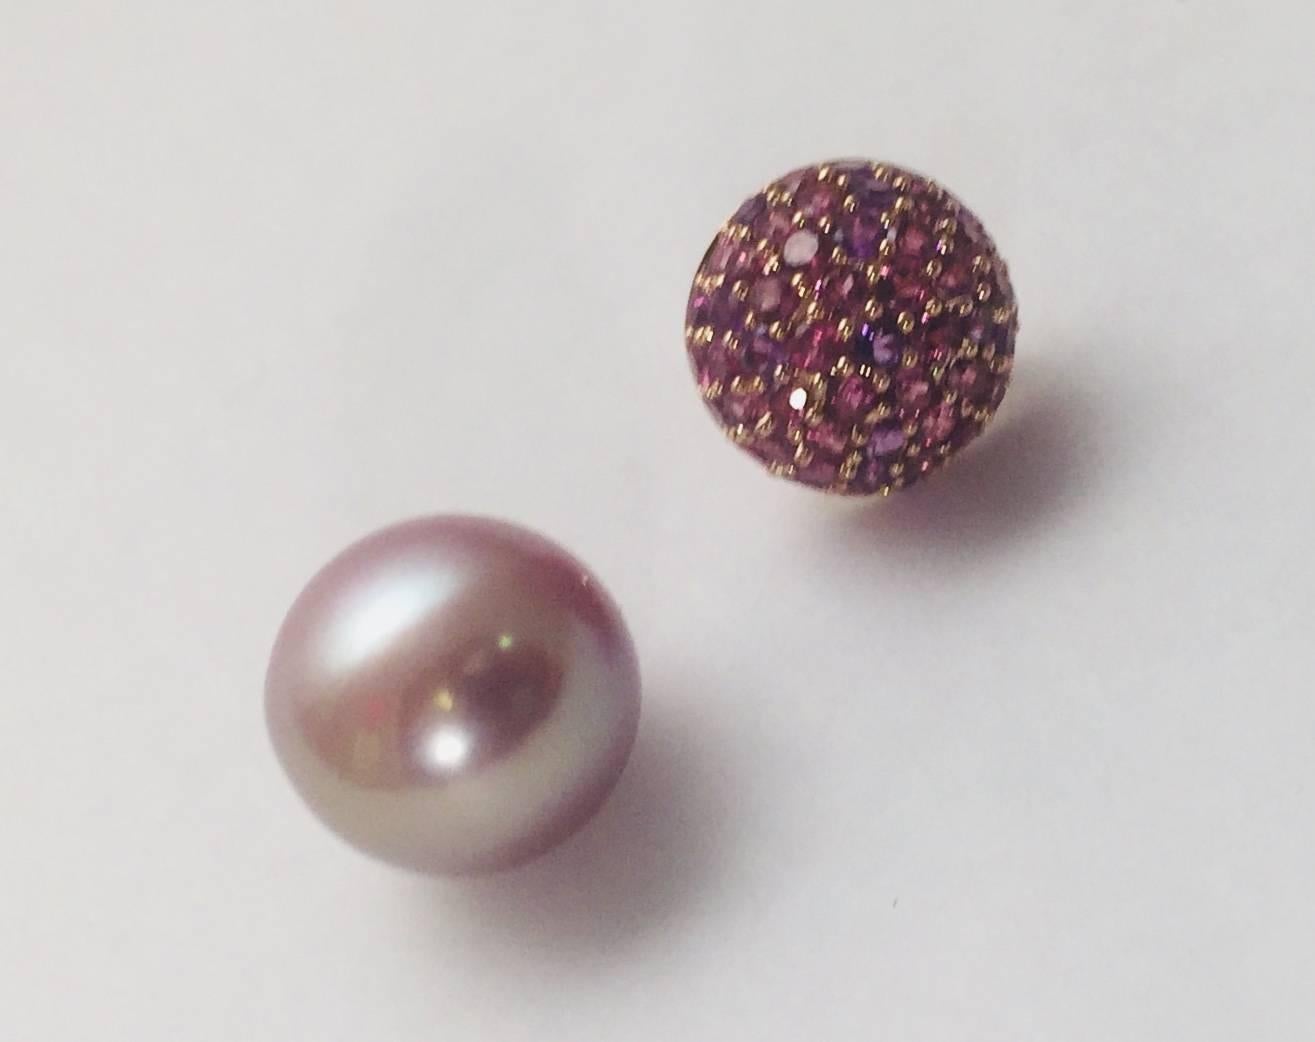 What a striking combination!  Beautifully crafted in 18 karat rose gold, these pierced earrings feature a button top replete with rhodolite garnets and amethysts having 2.80 carats total weight.  The colors are gorgeous together!  Under each button